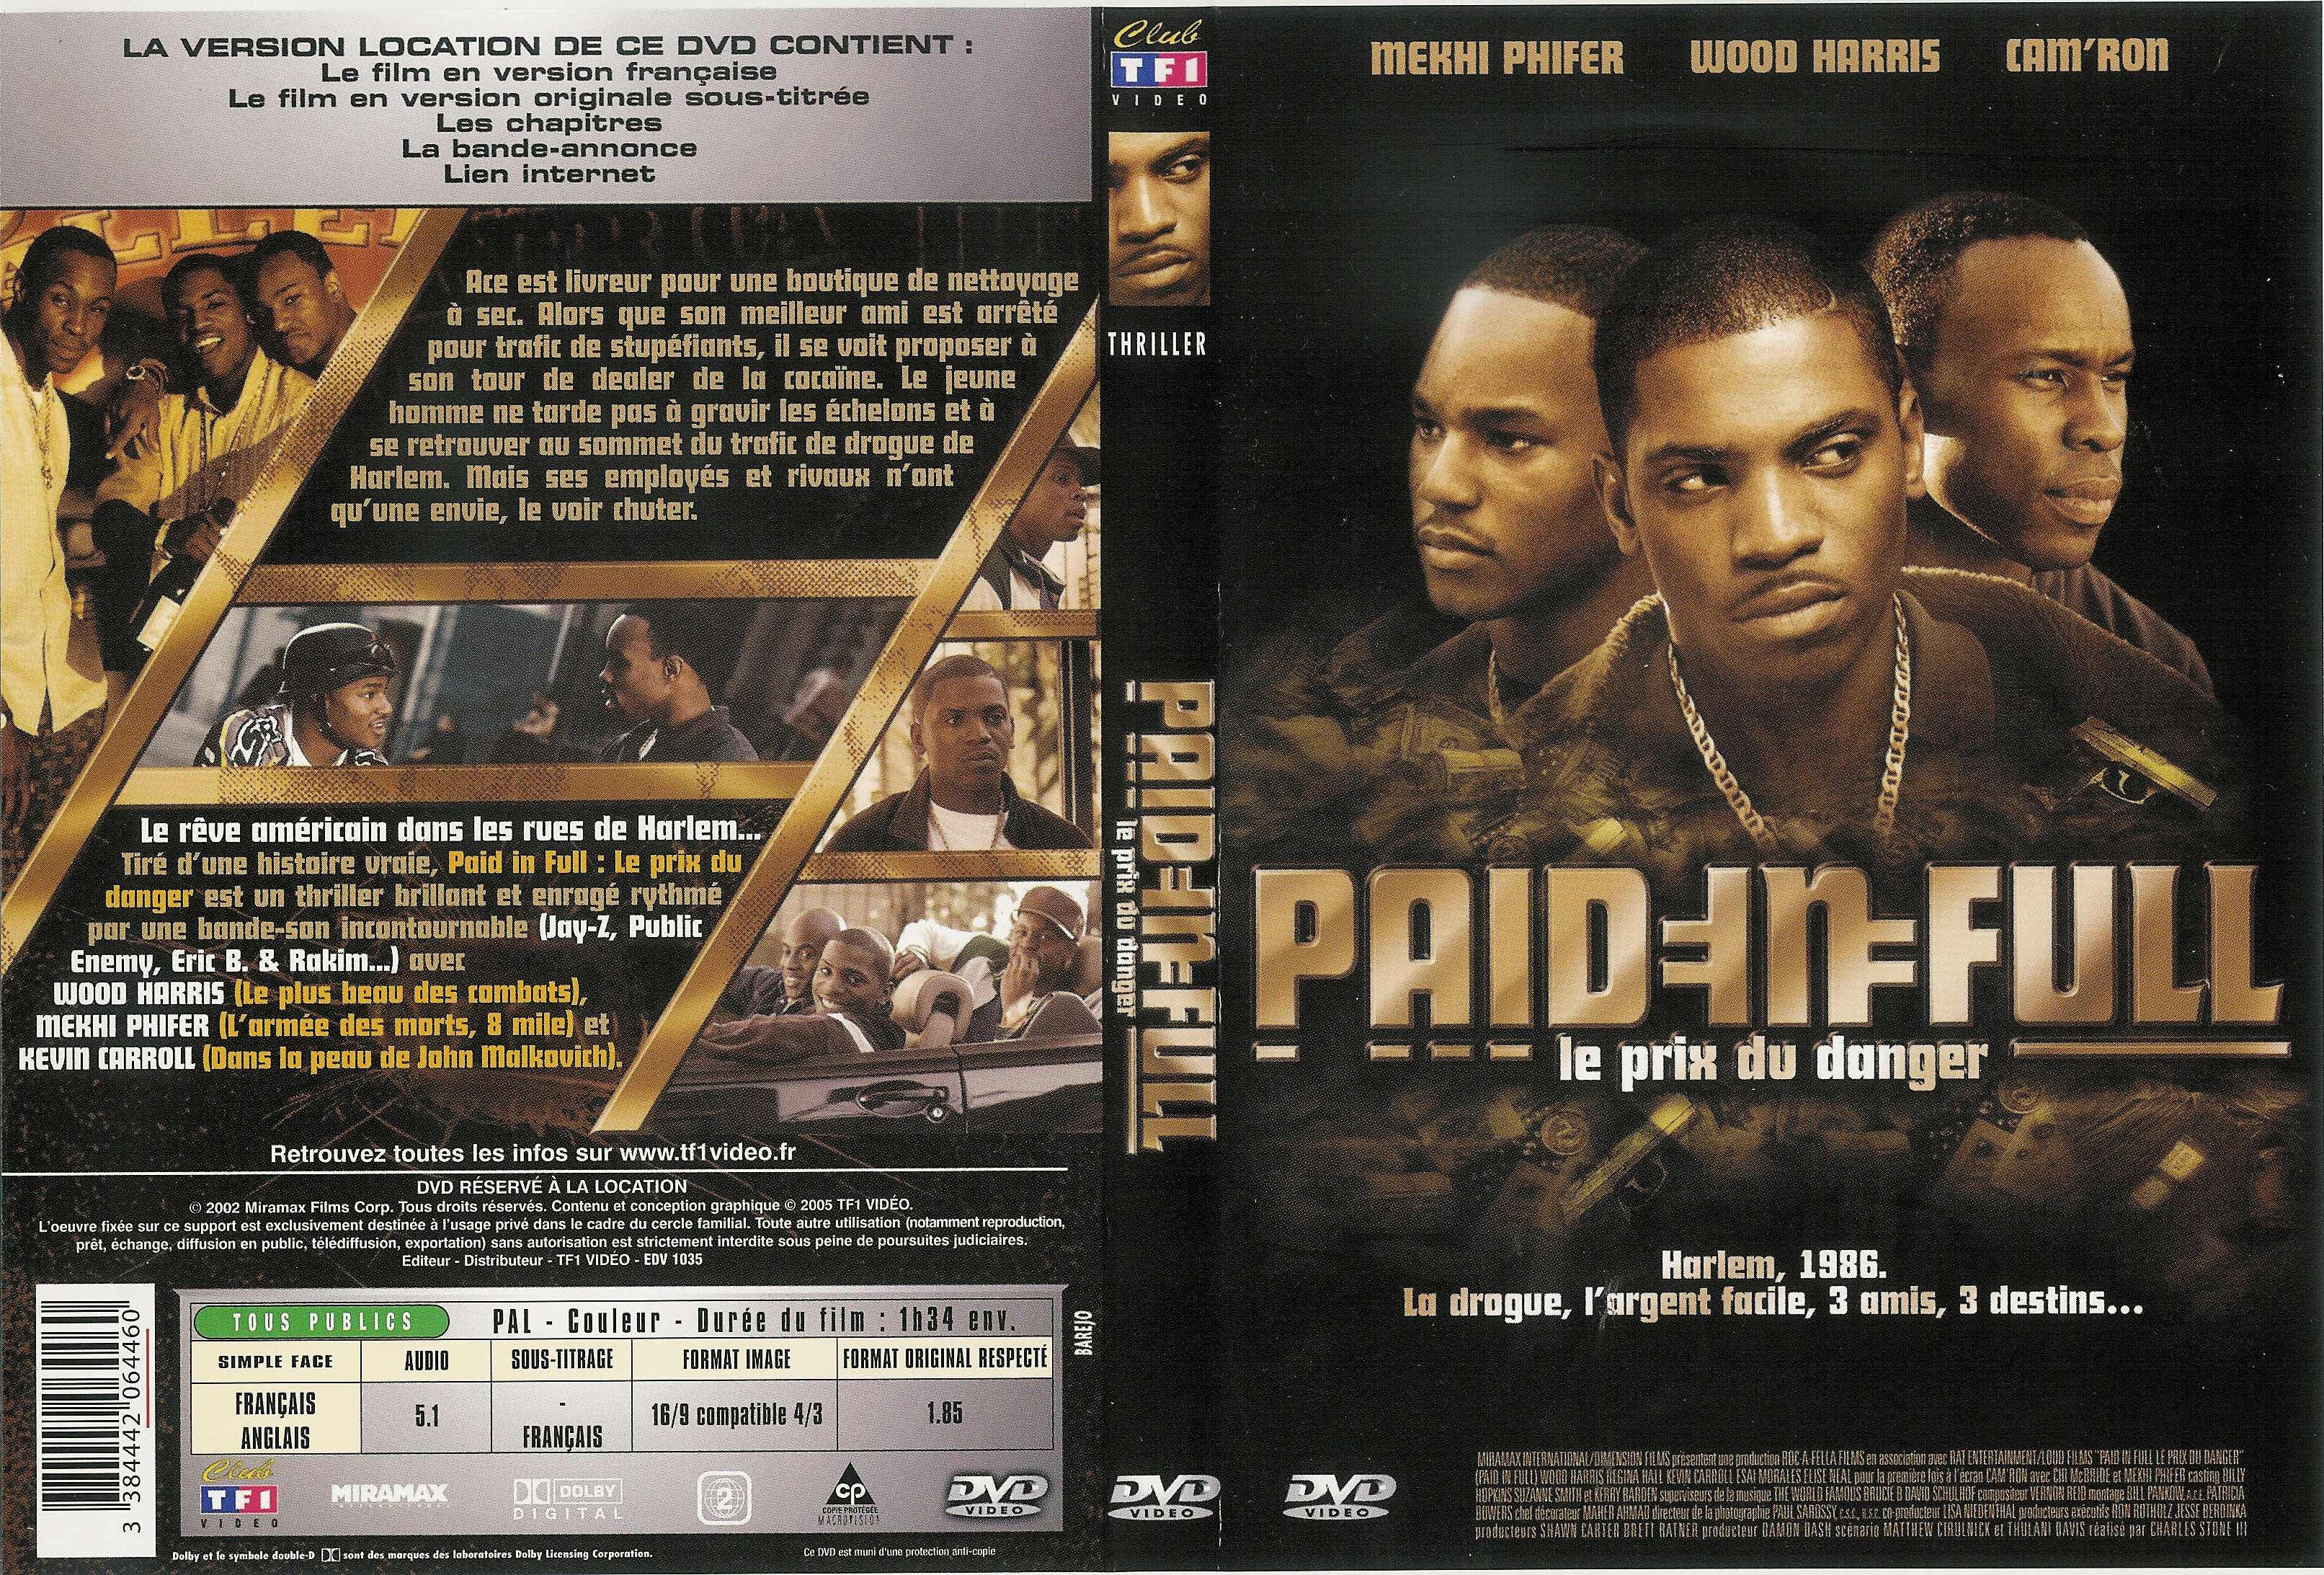 Jaquette DVD Paid in full v2